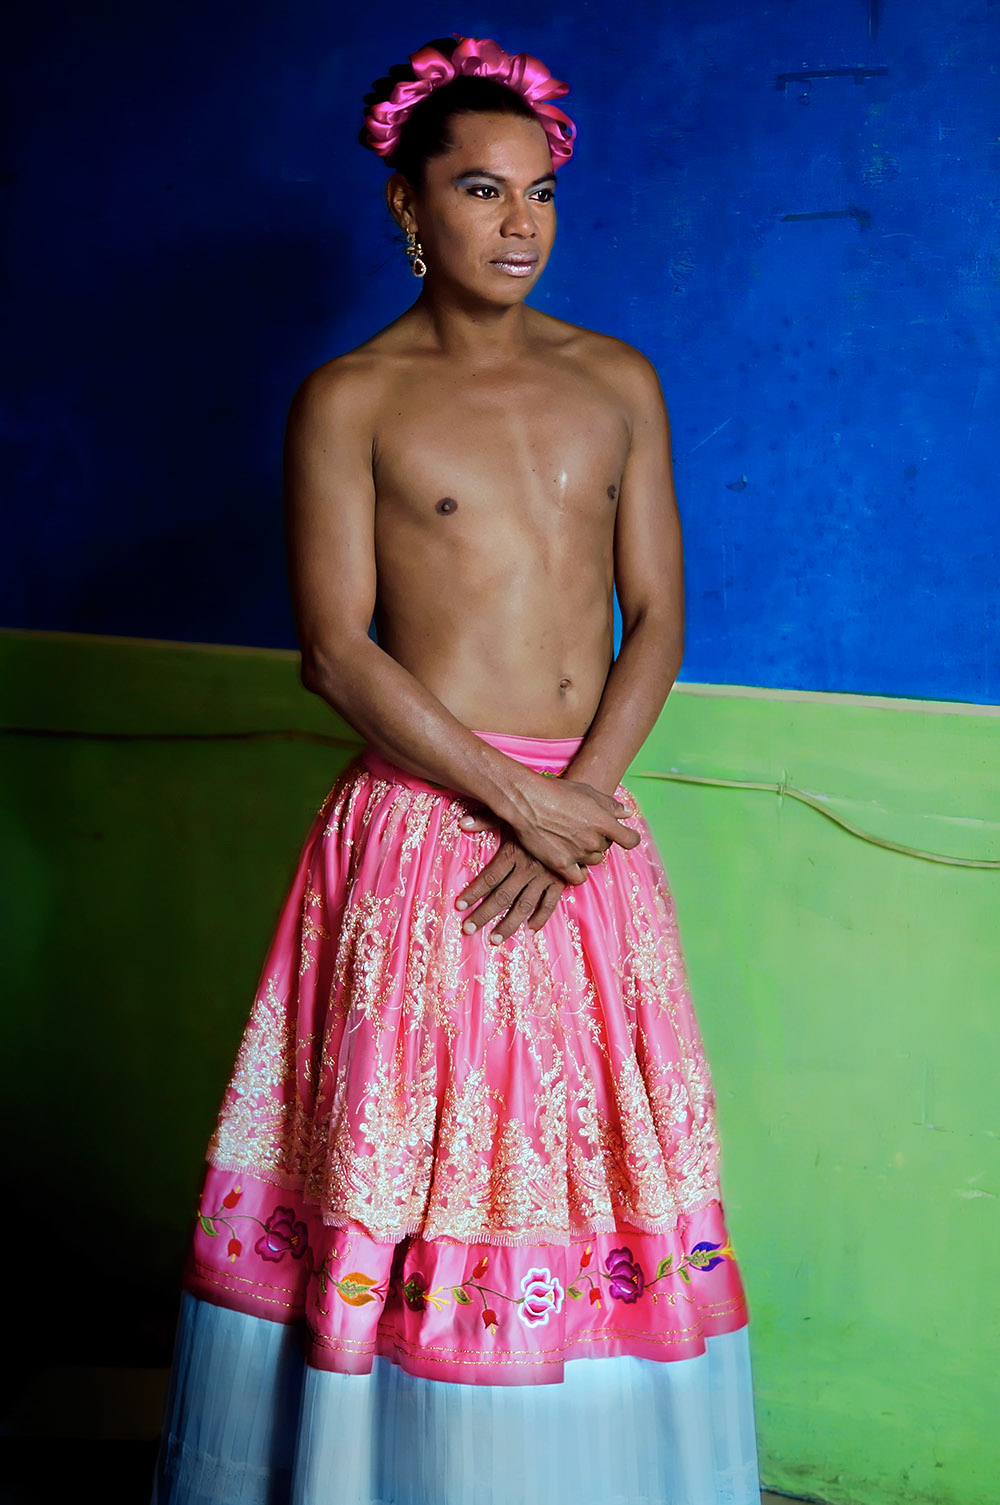 A shirtless muxe wearing a pink skirt and make-up looks off-camera.